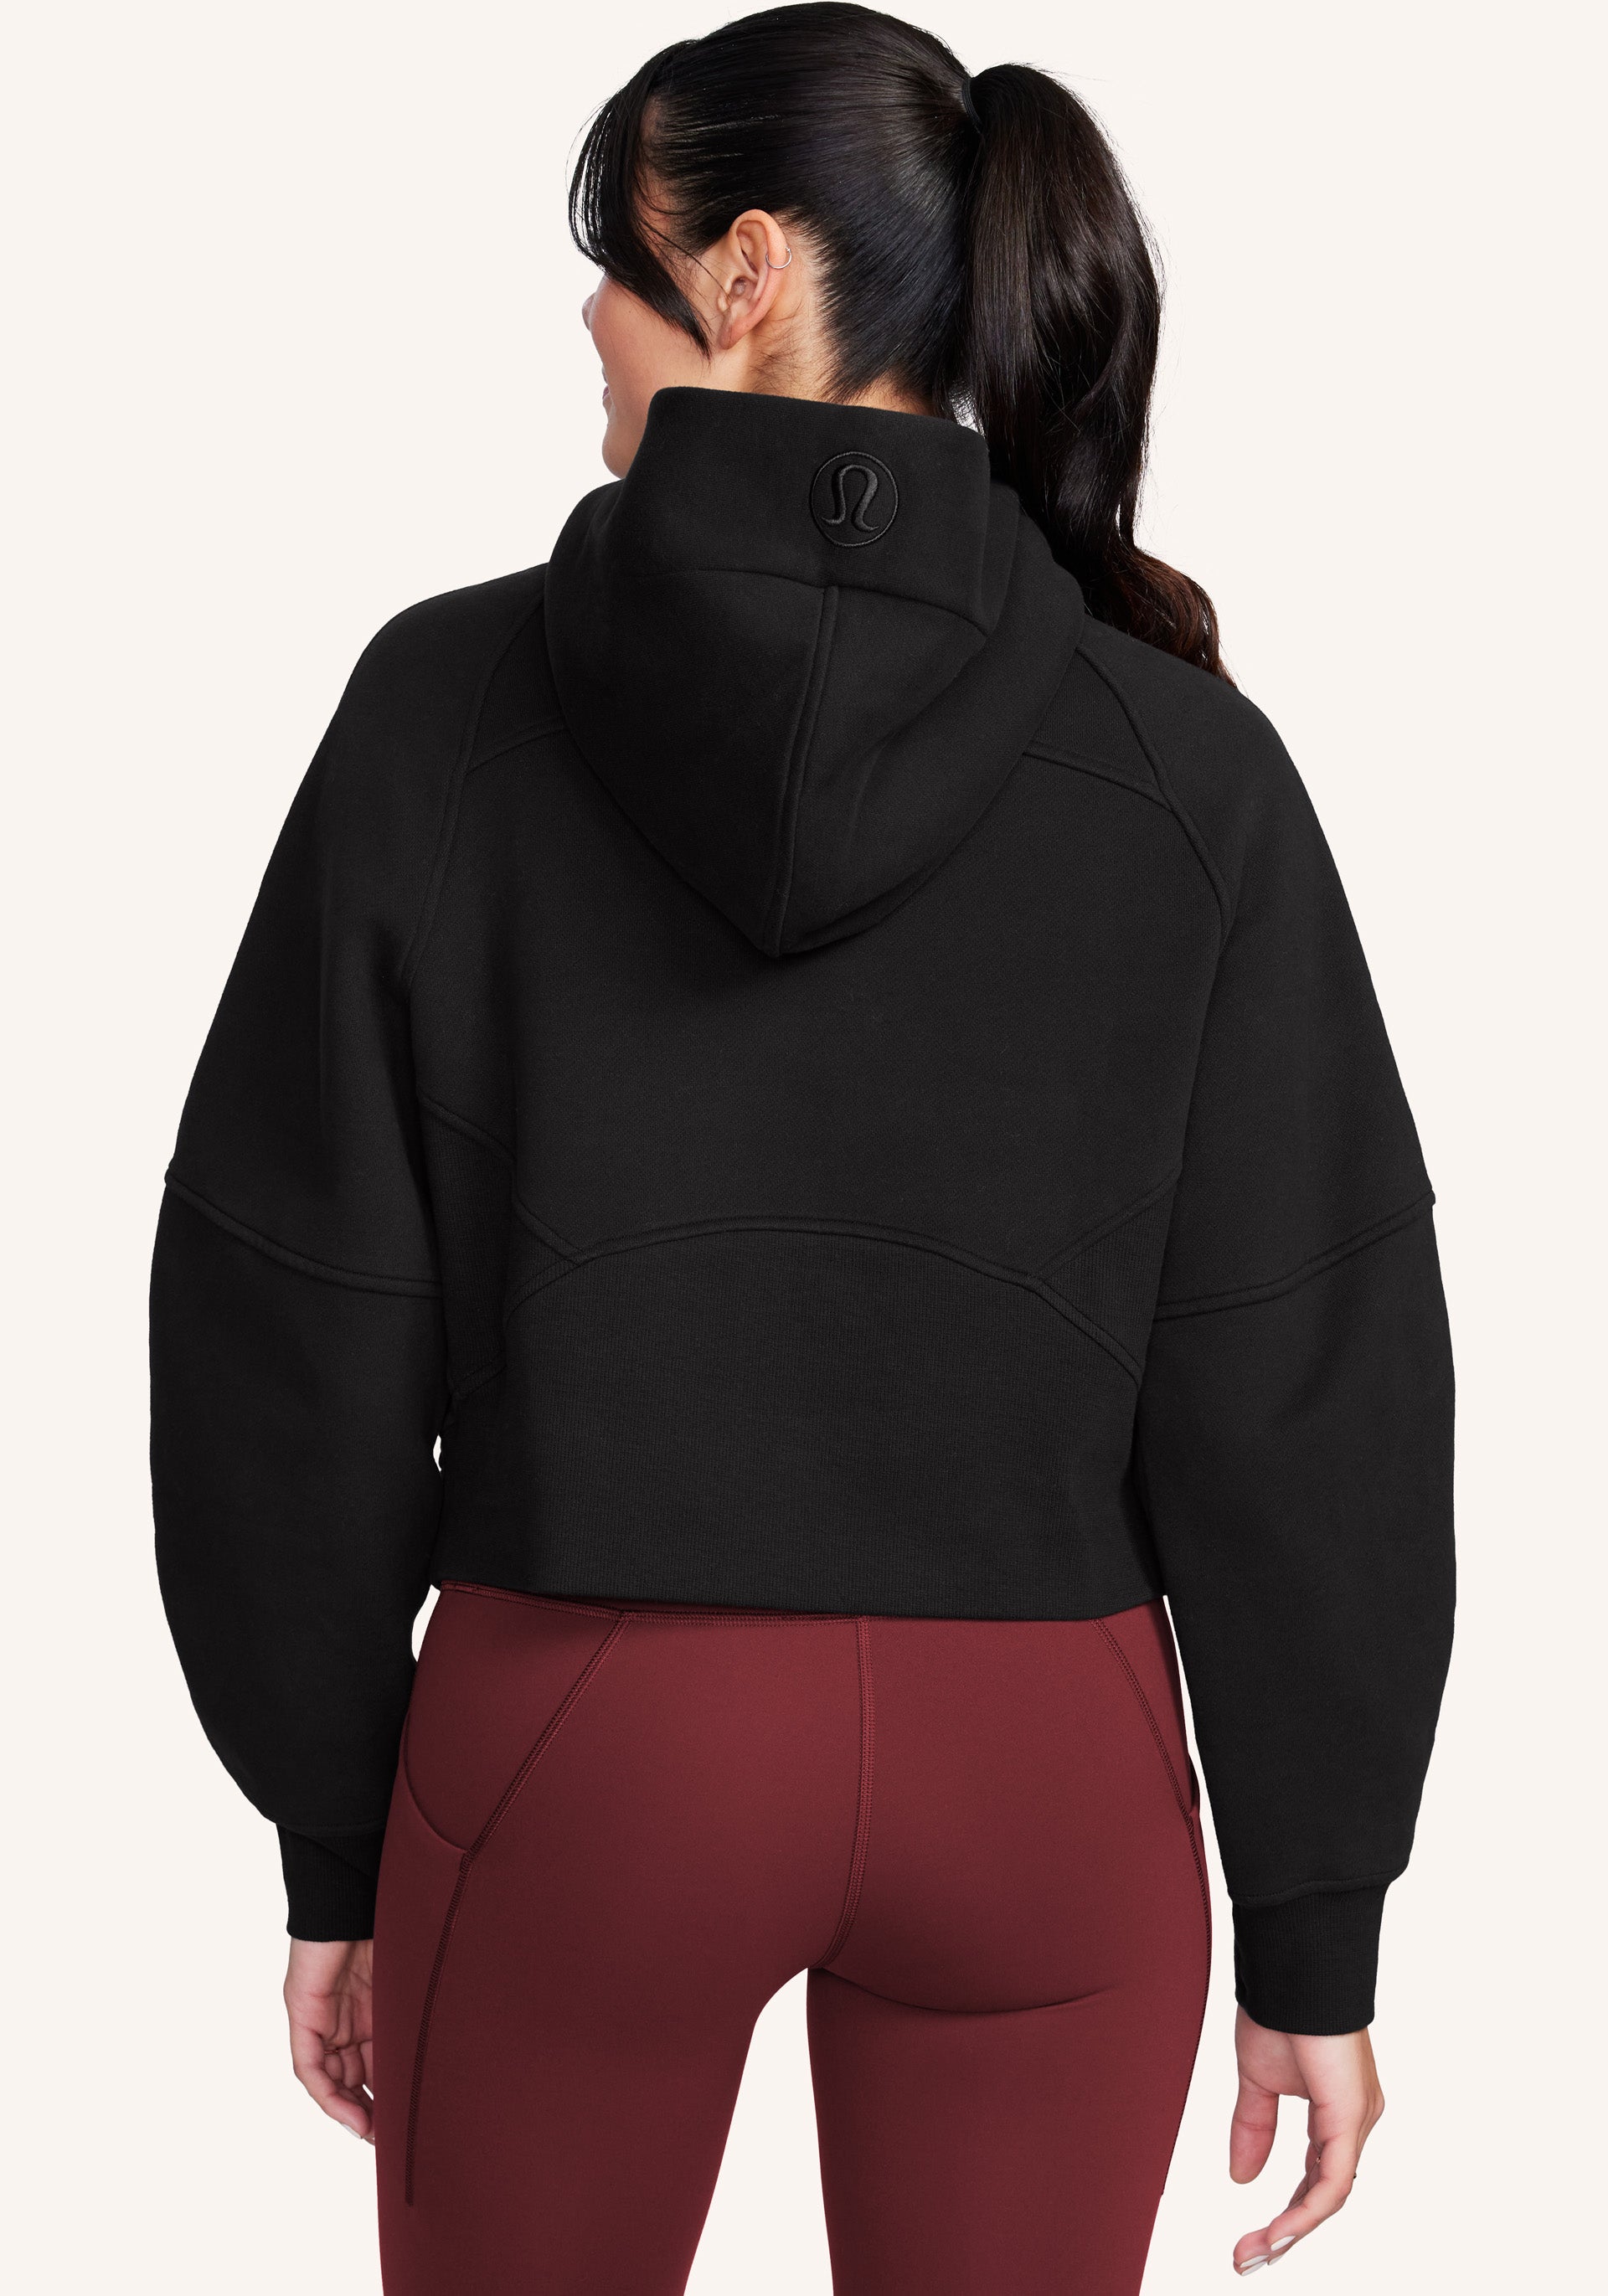 SELL] [US] Scuba Oversized Hoodie Half-zip and Full-zip XS/S and M